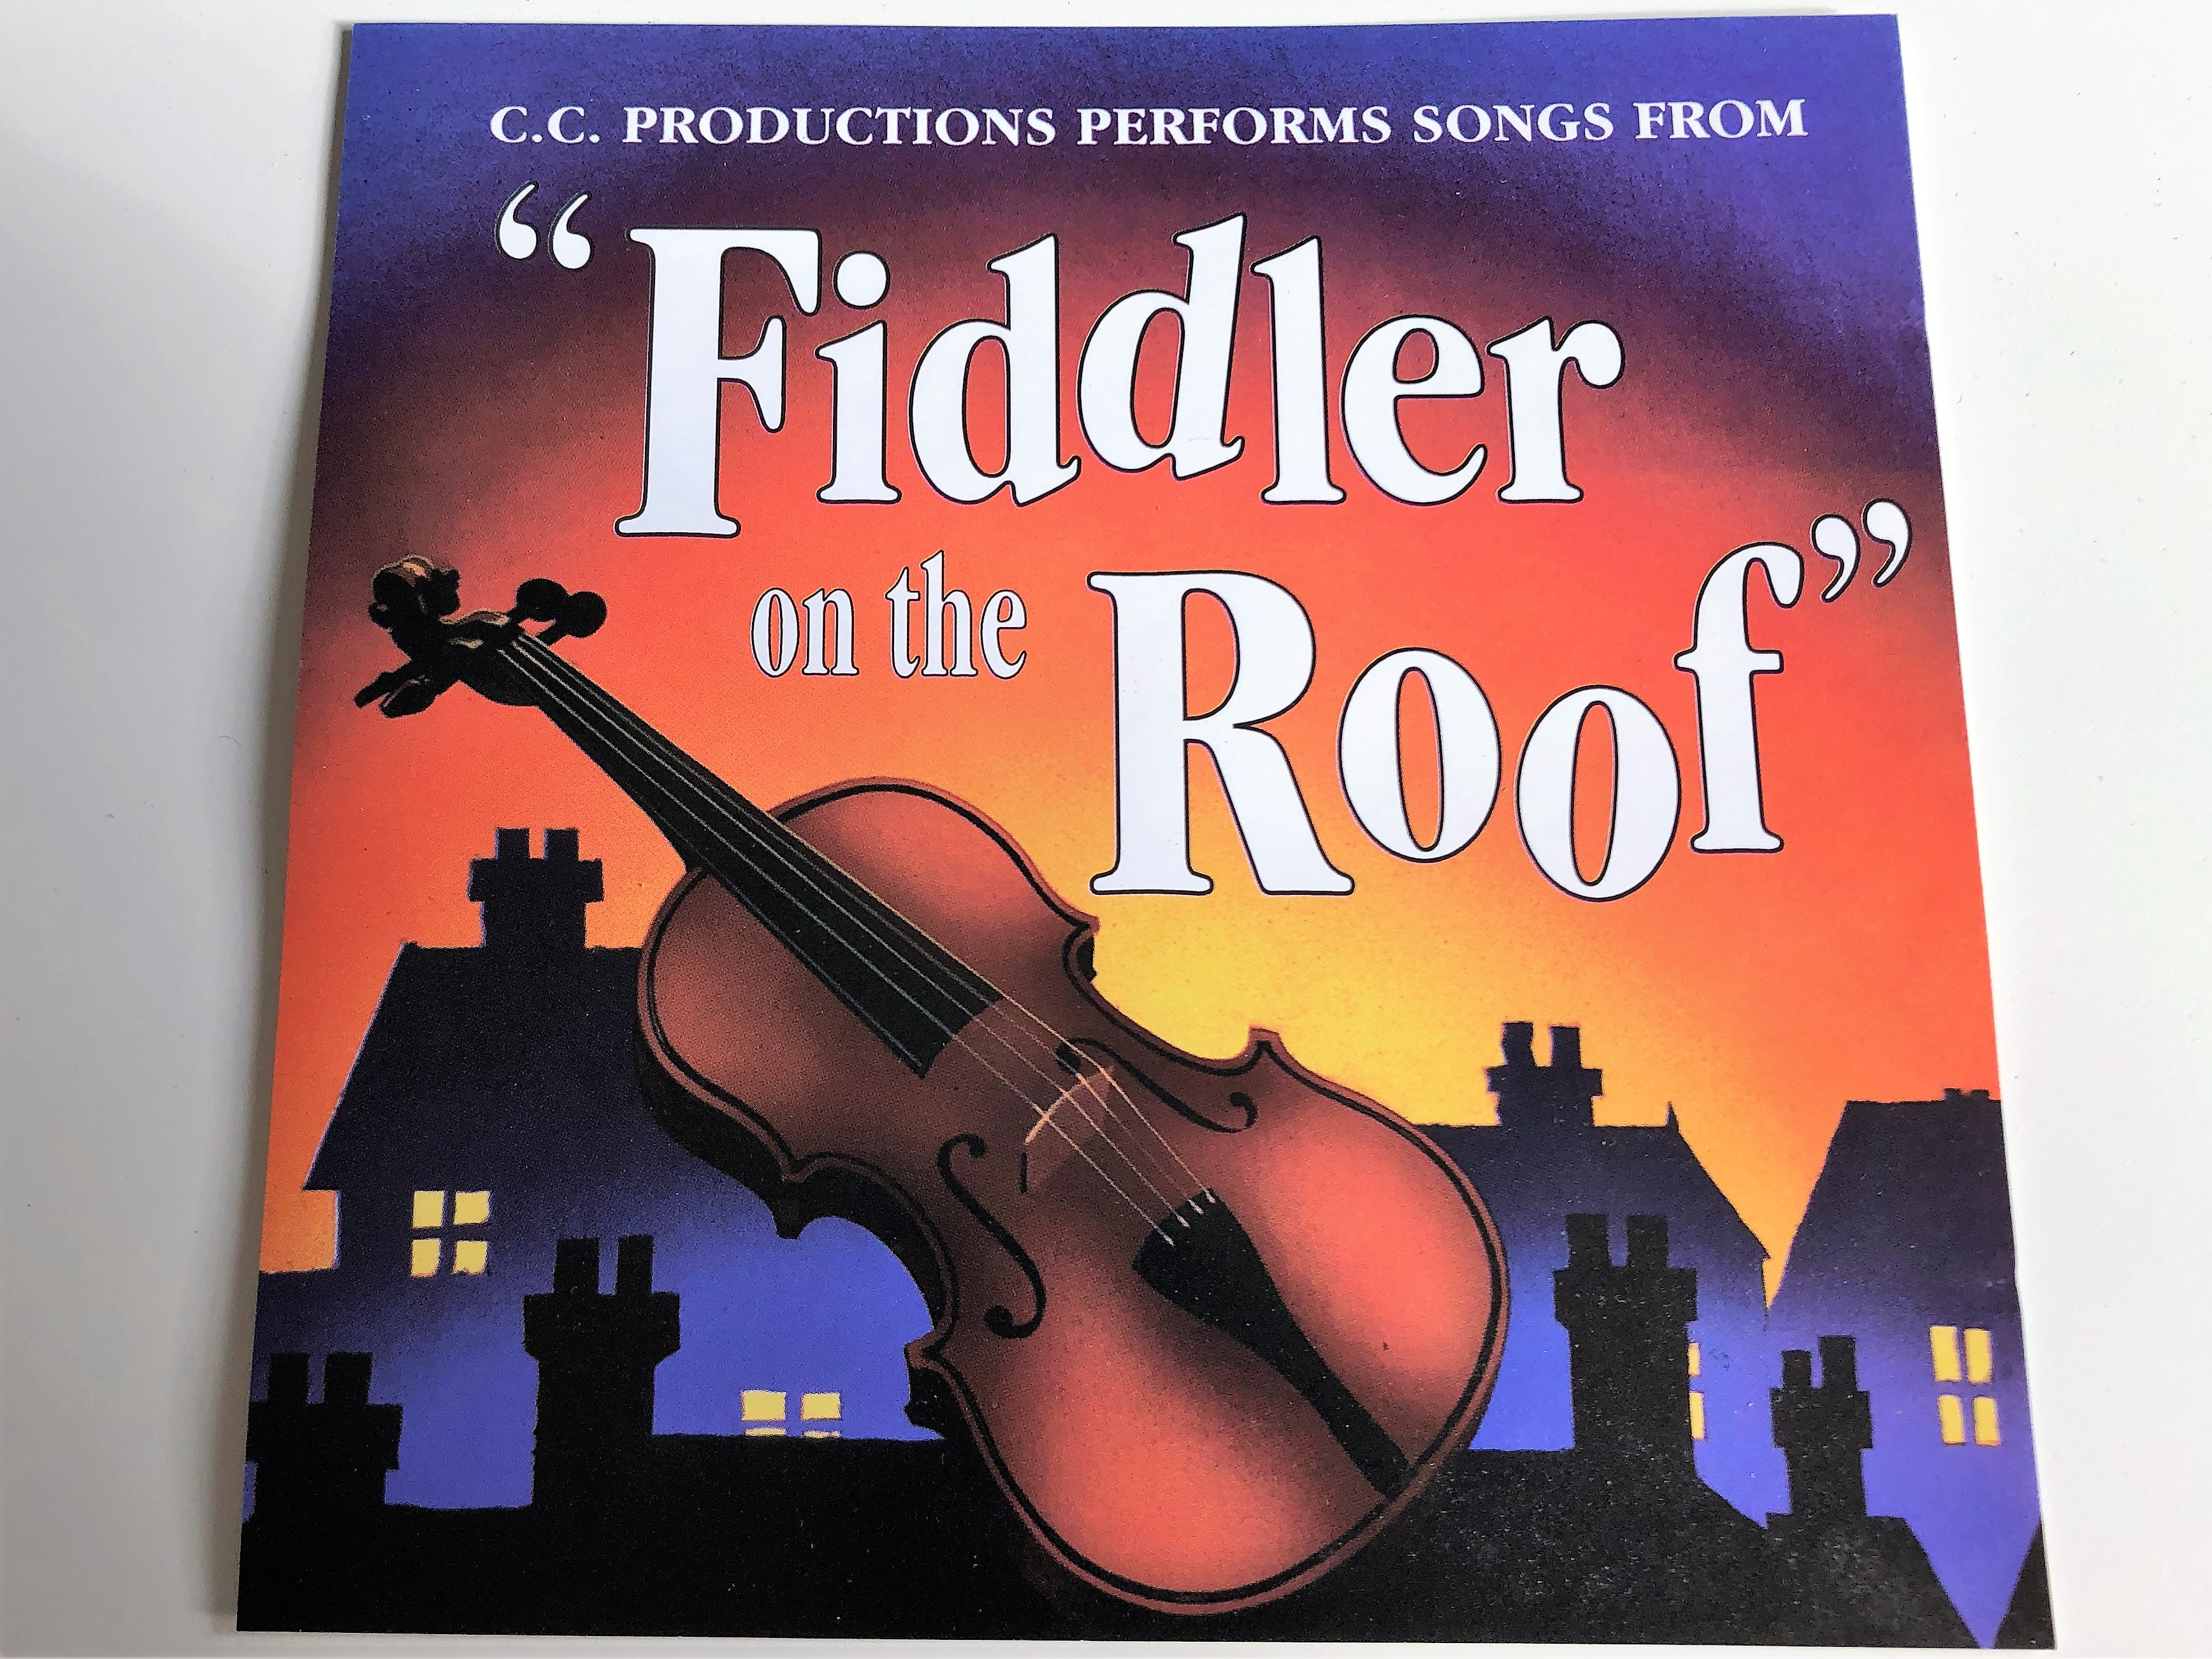 c.c-productions-performs-songs-from-fiddler-on-the-roof-audio-cd-1996-tradition-matchmaker-matchmaker-if-i-were-a-rich-man-sunrise-sunset-trip006a-qed-1-.jpg